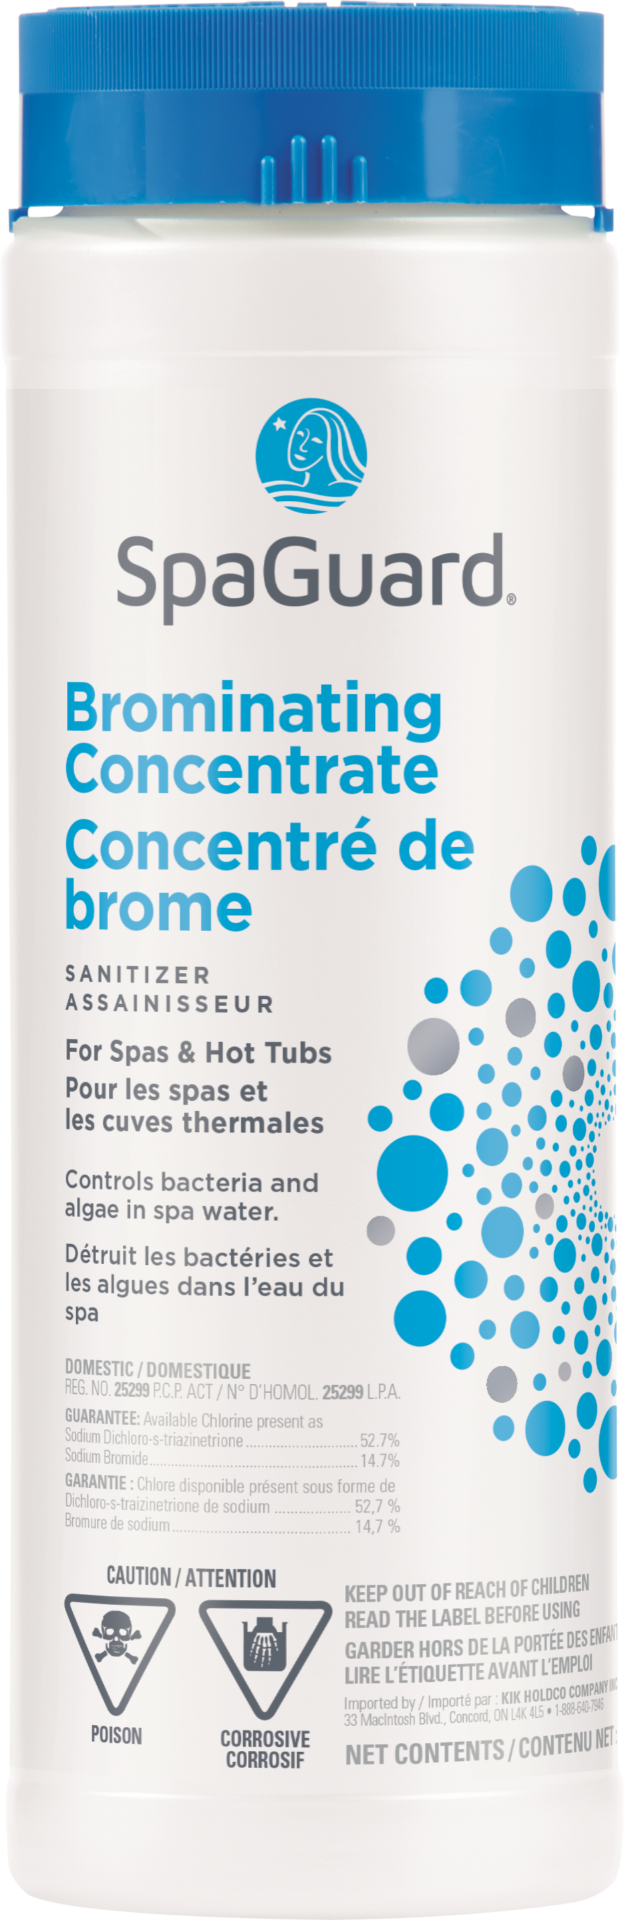 SpaGuard Brominating Concentrate 800g - SPAGUARD BROMINATING CONCENTRATE - 800g